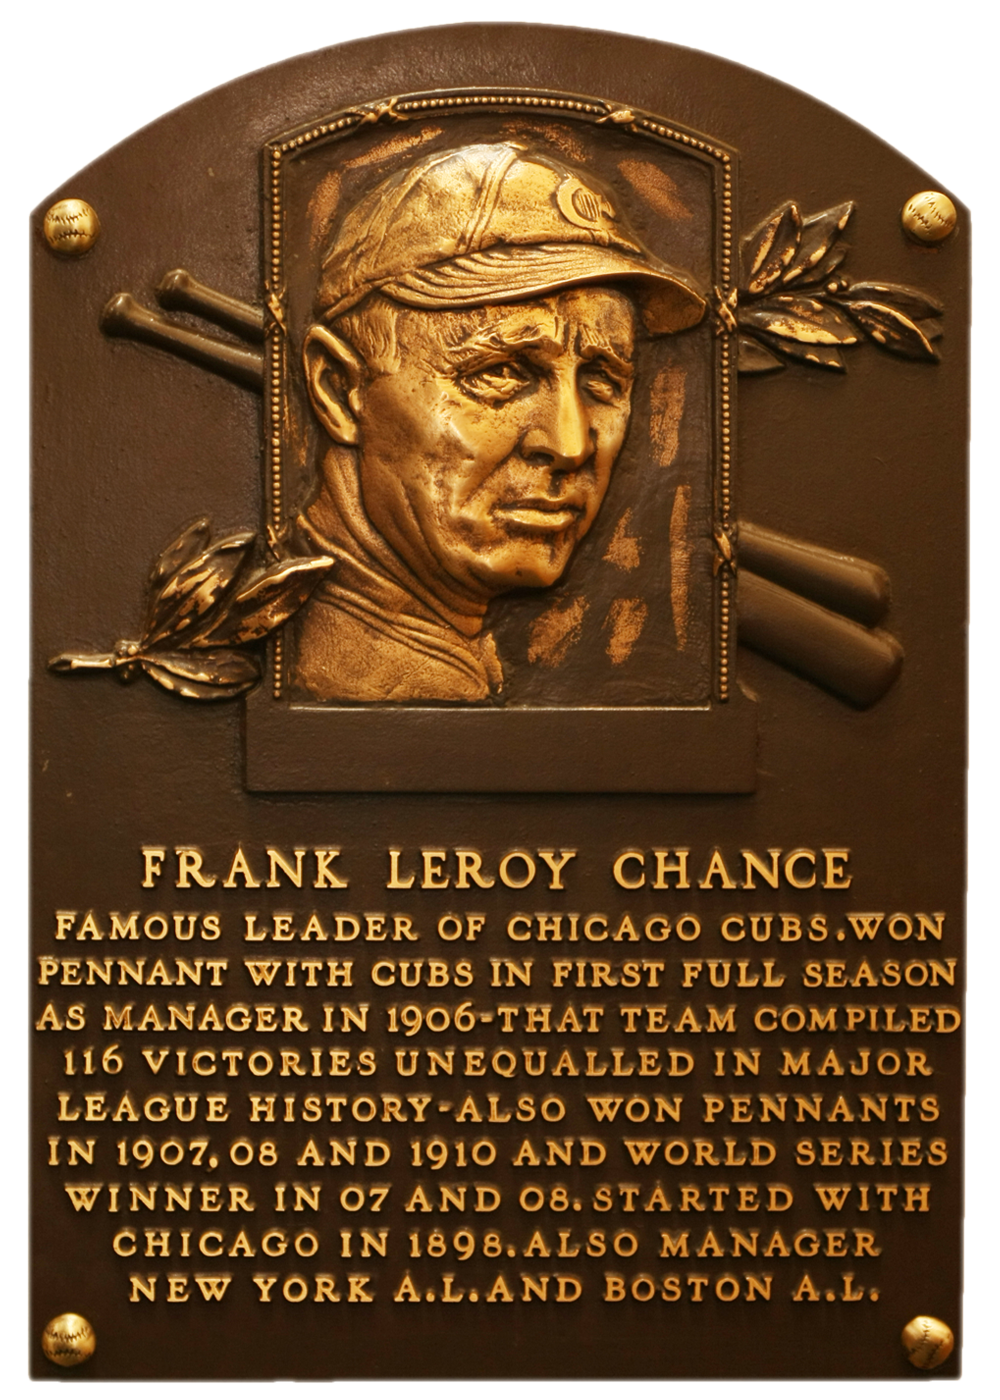 Frank Chance Hall of Fame plaque